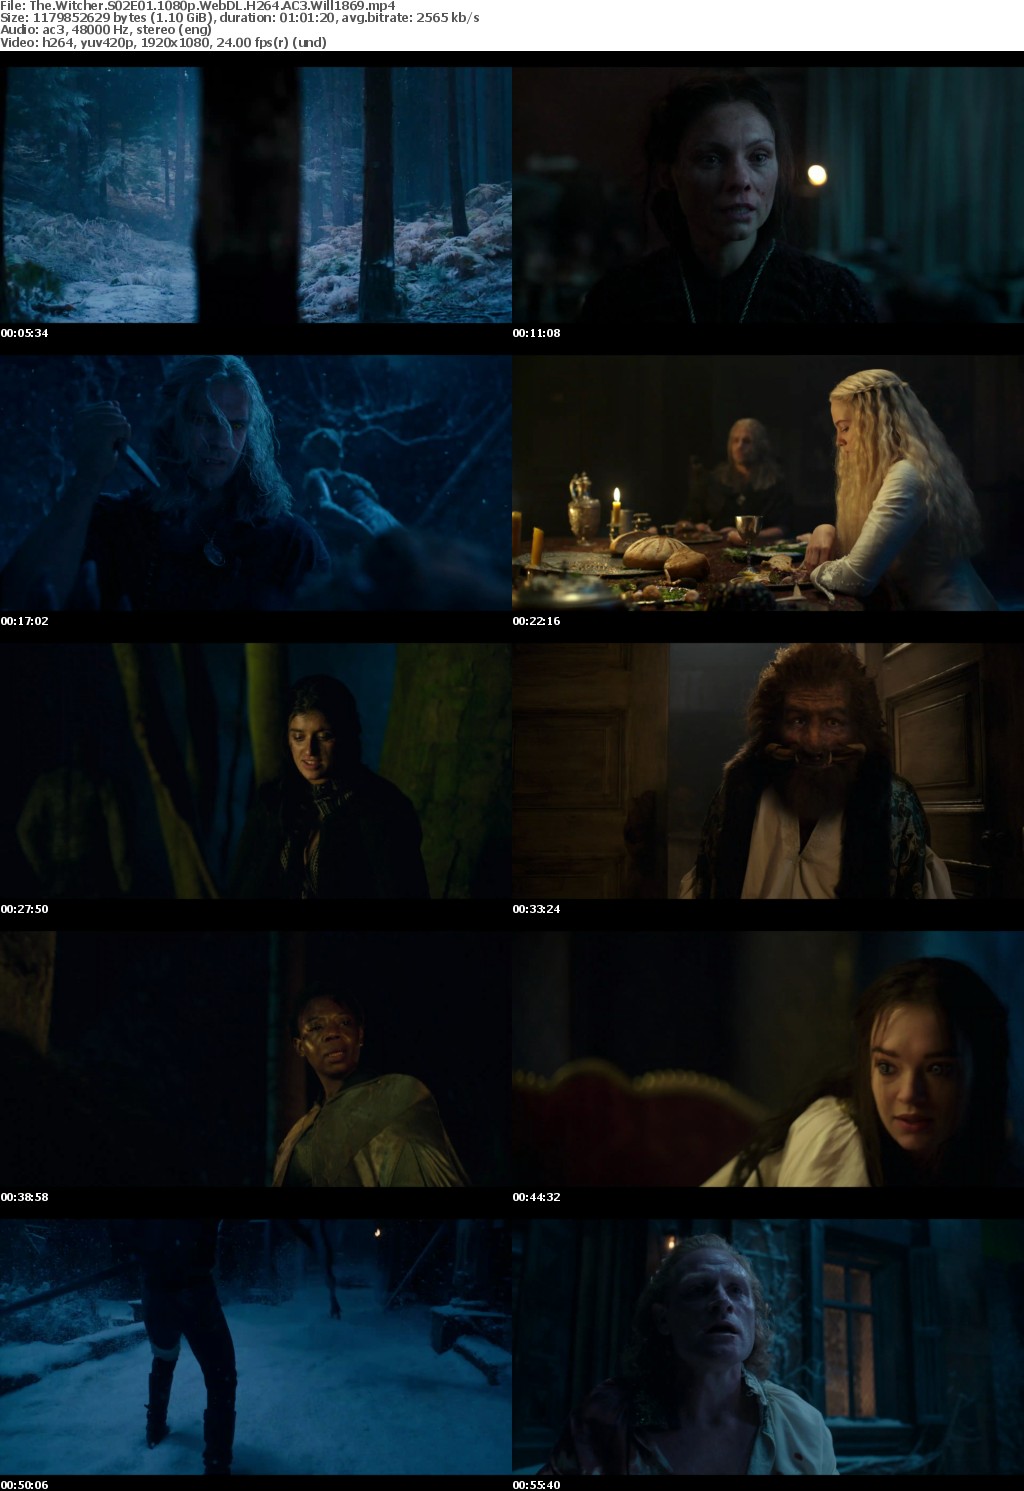 The Witcher S02E01 1080p WebDL H264 AC3 Will1869